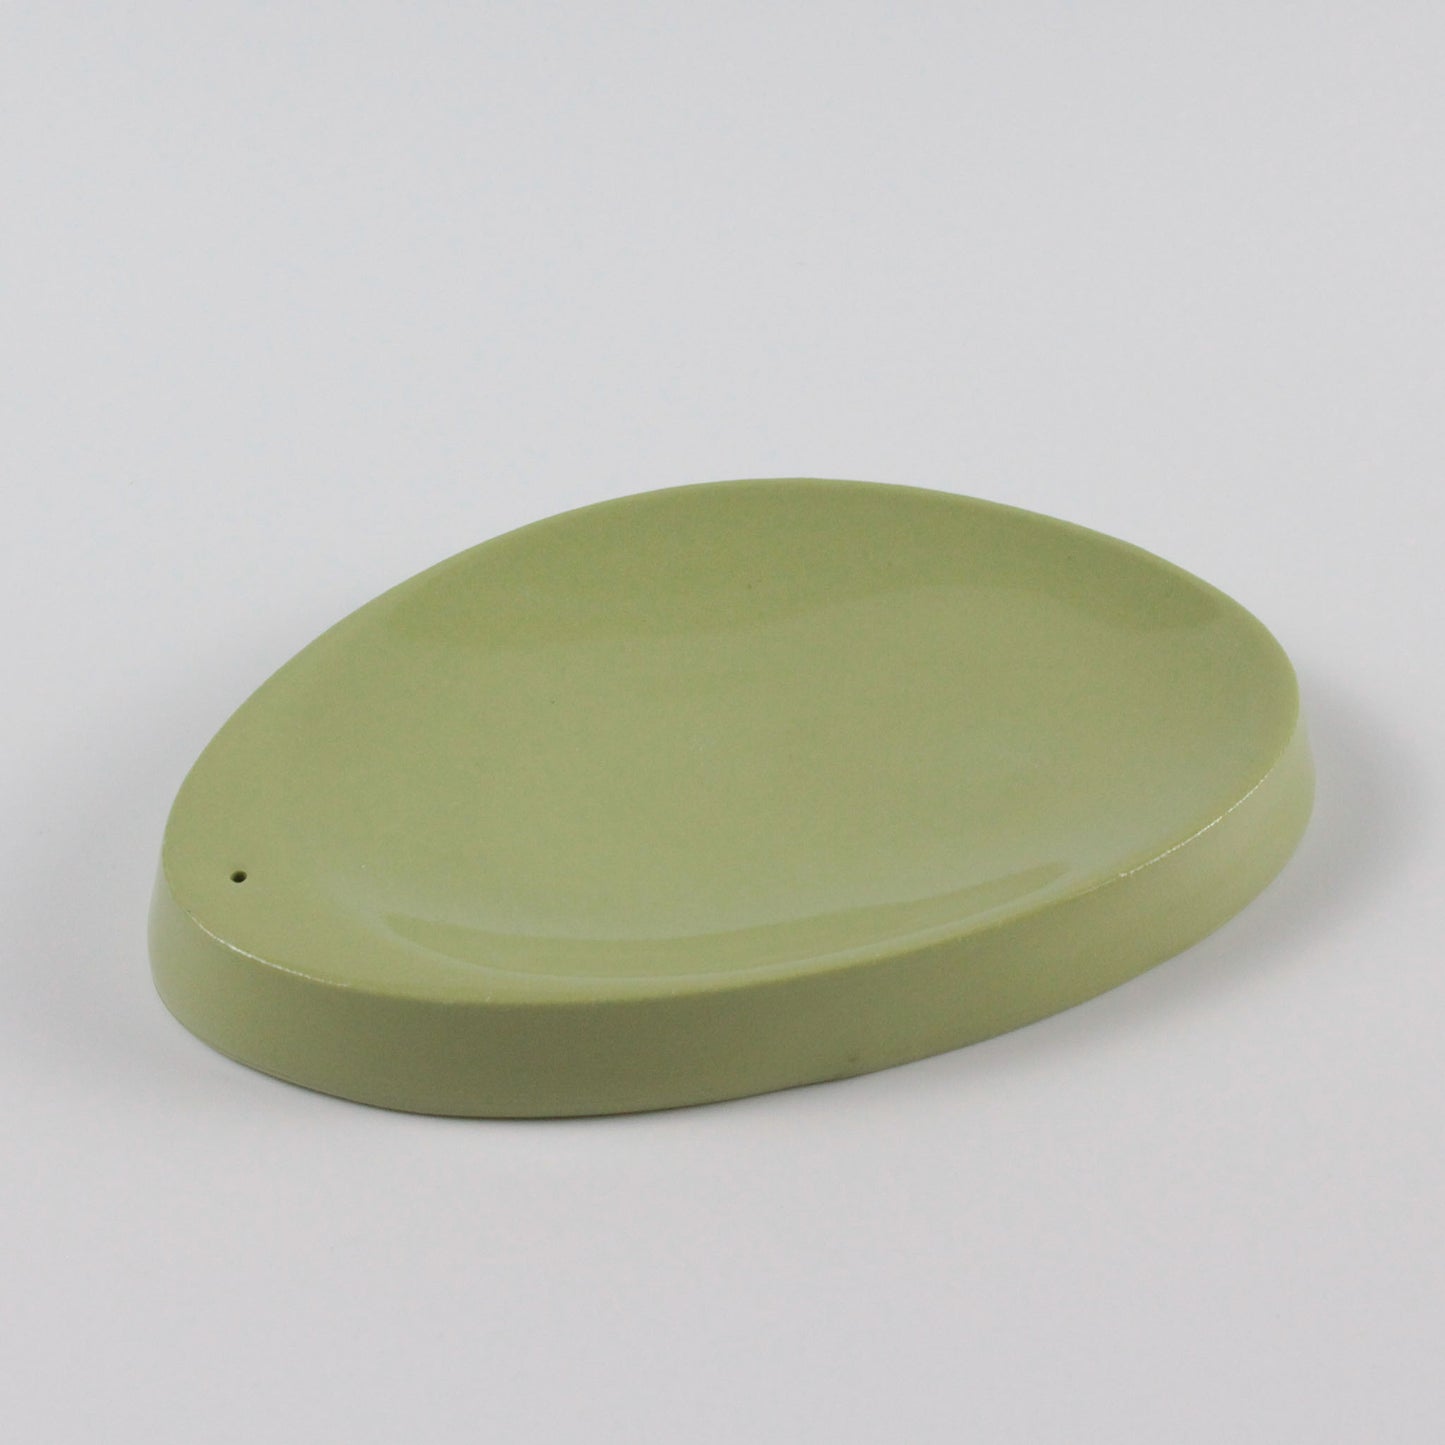 One Color : Incense Plate